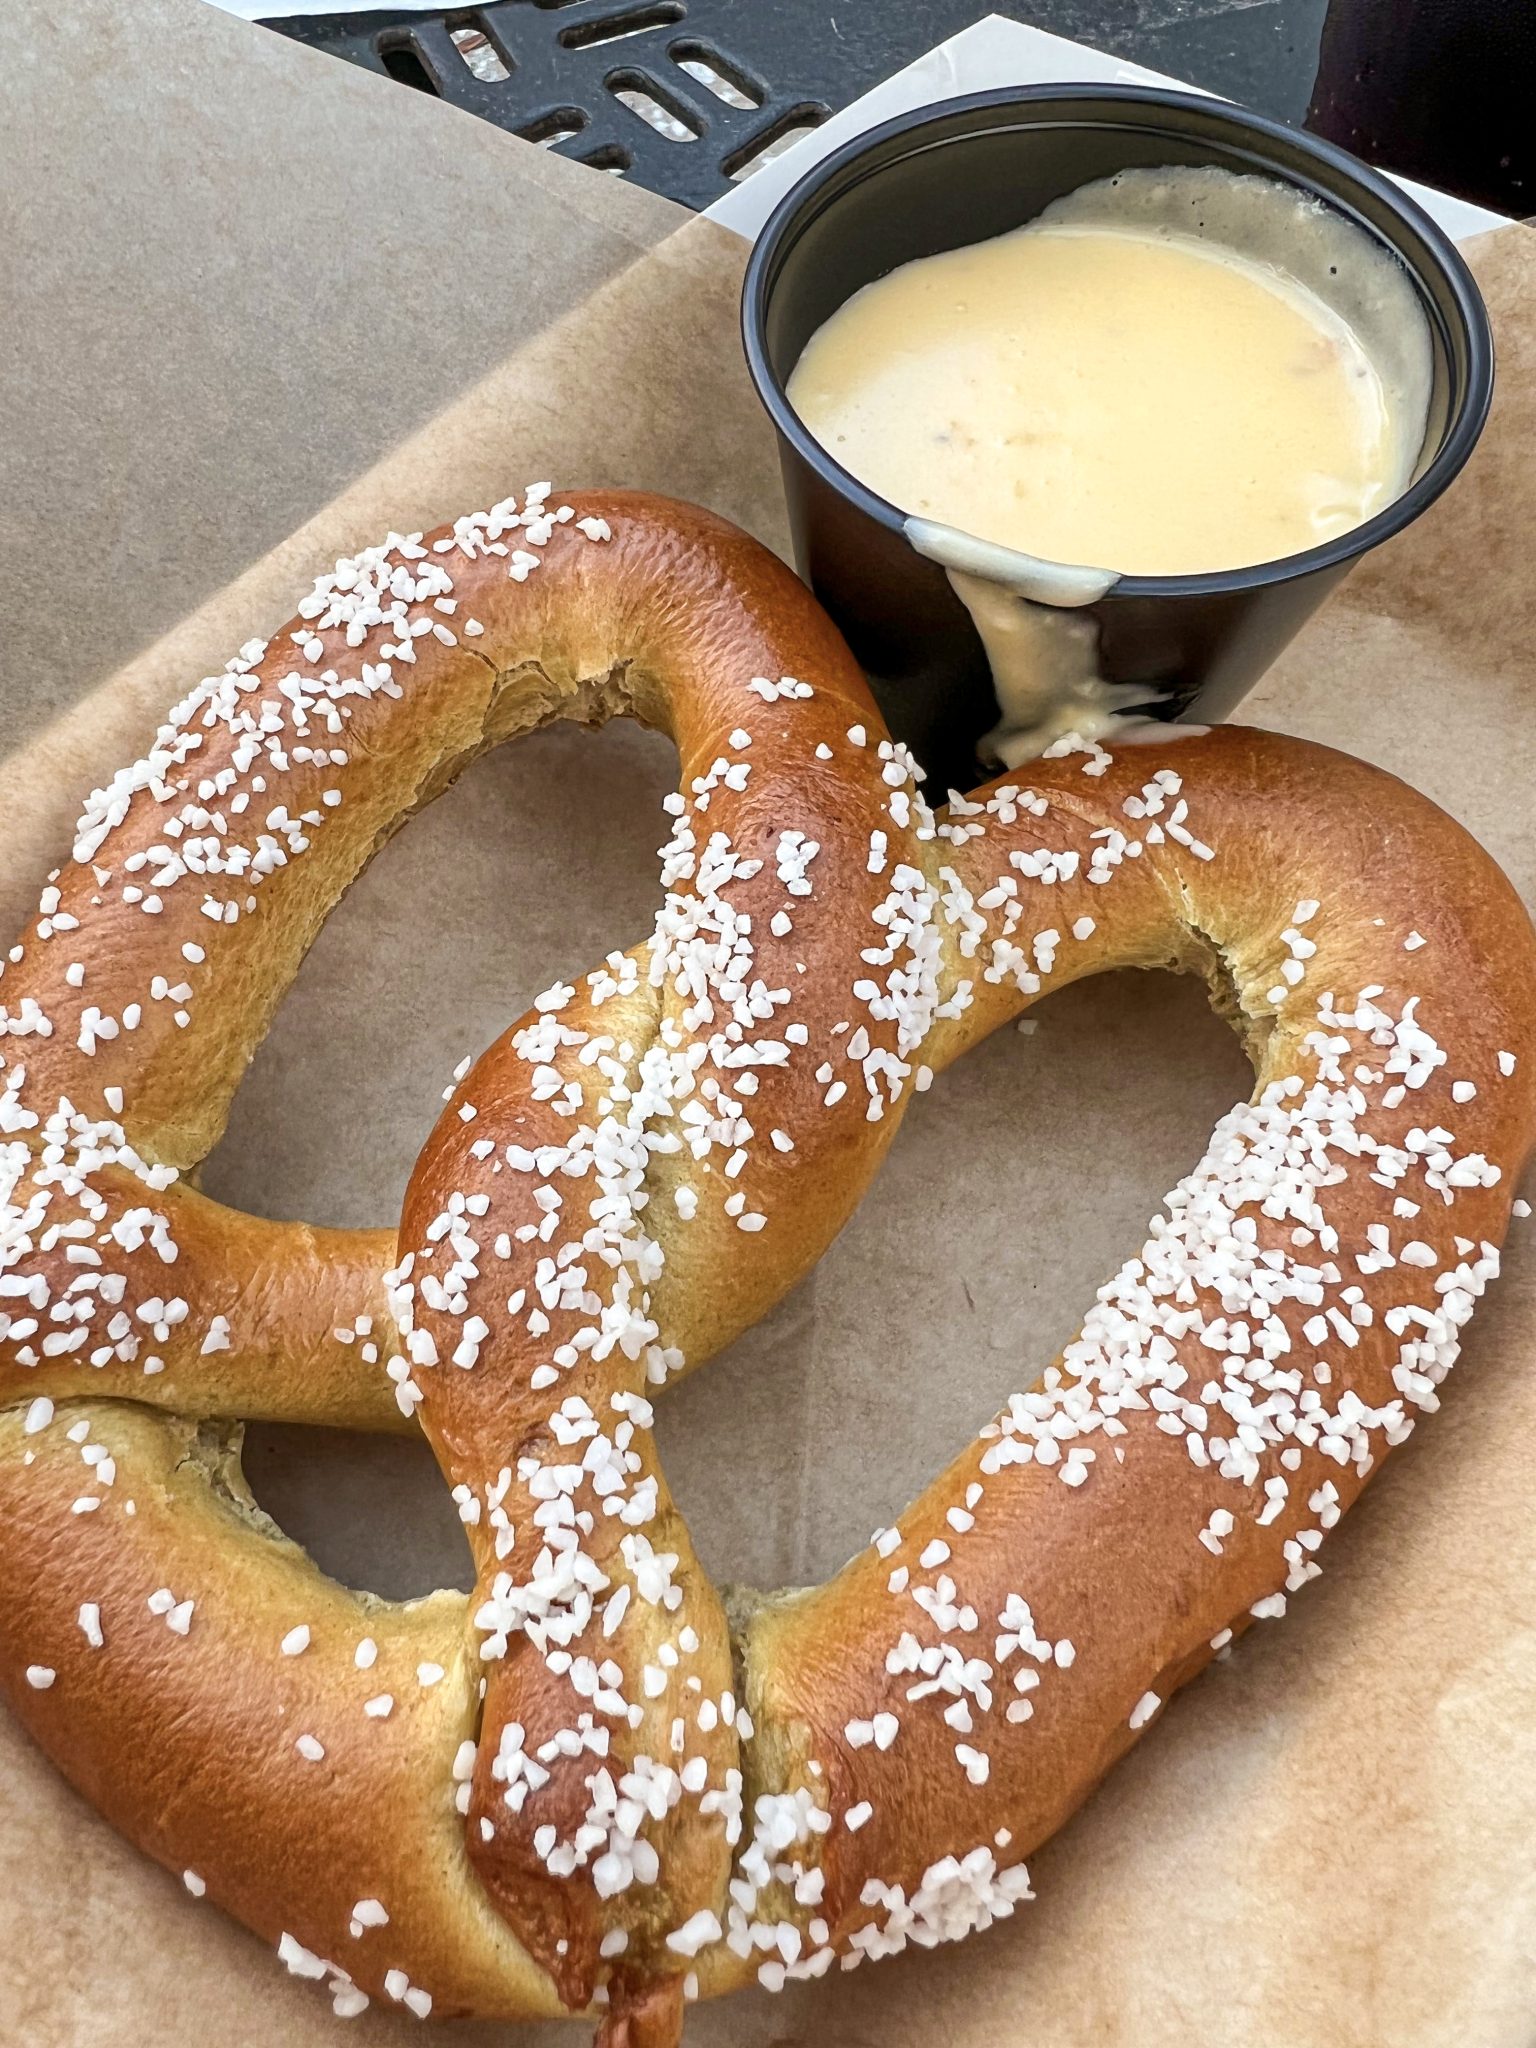 Salted pretzel and cheese sauce